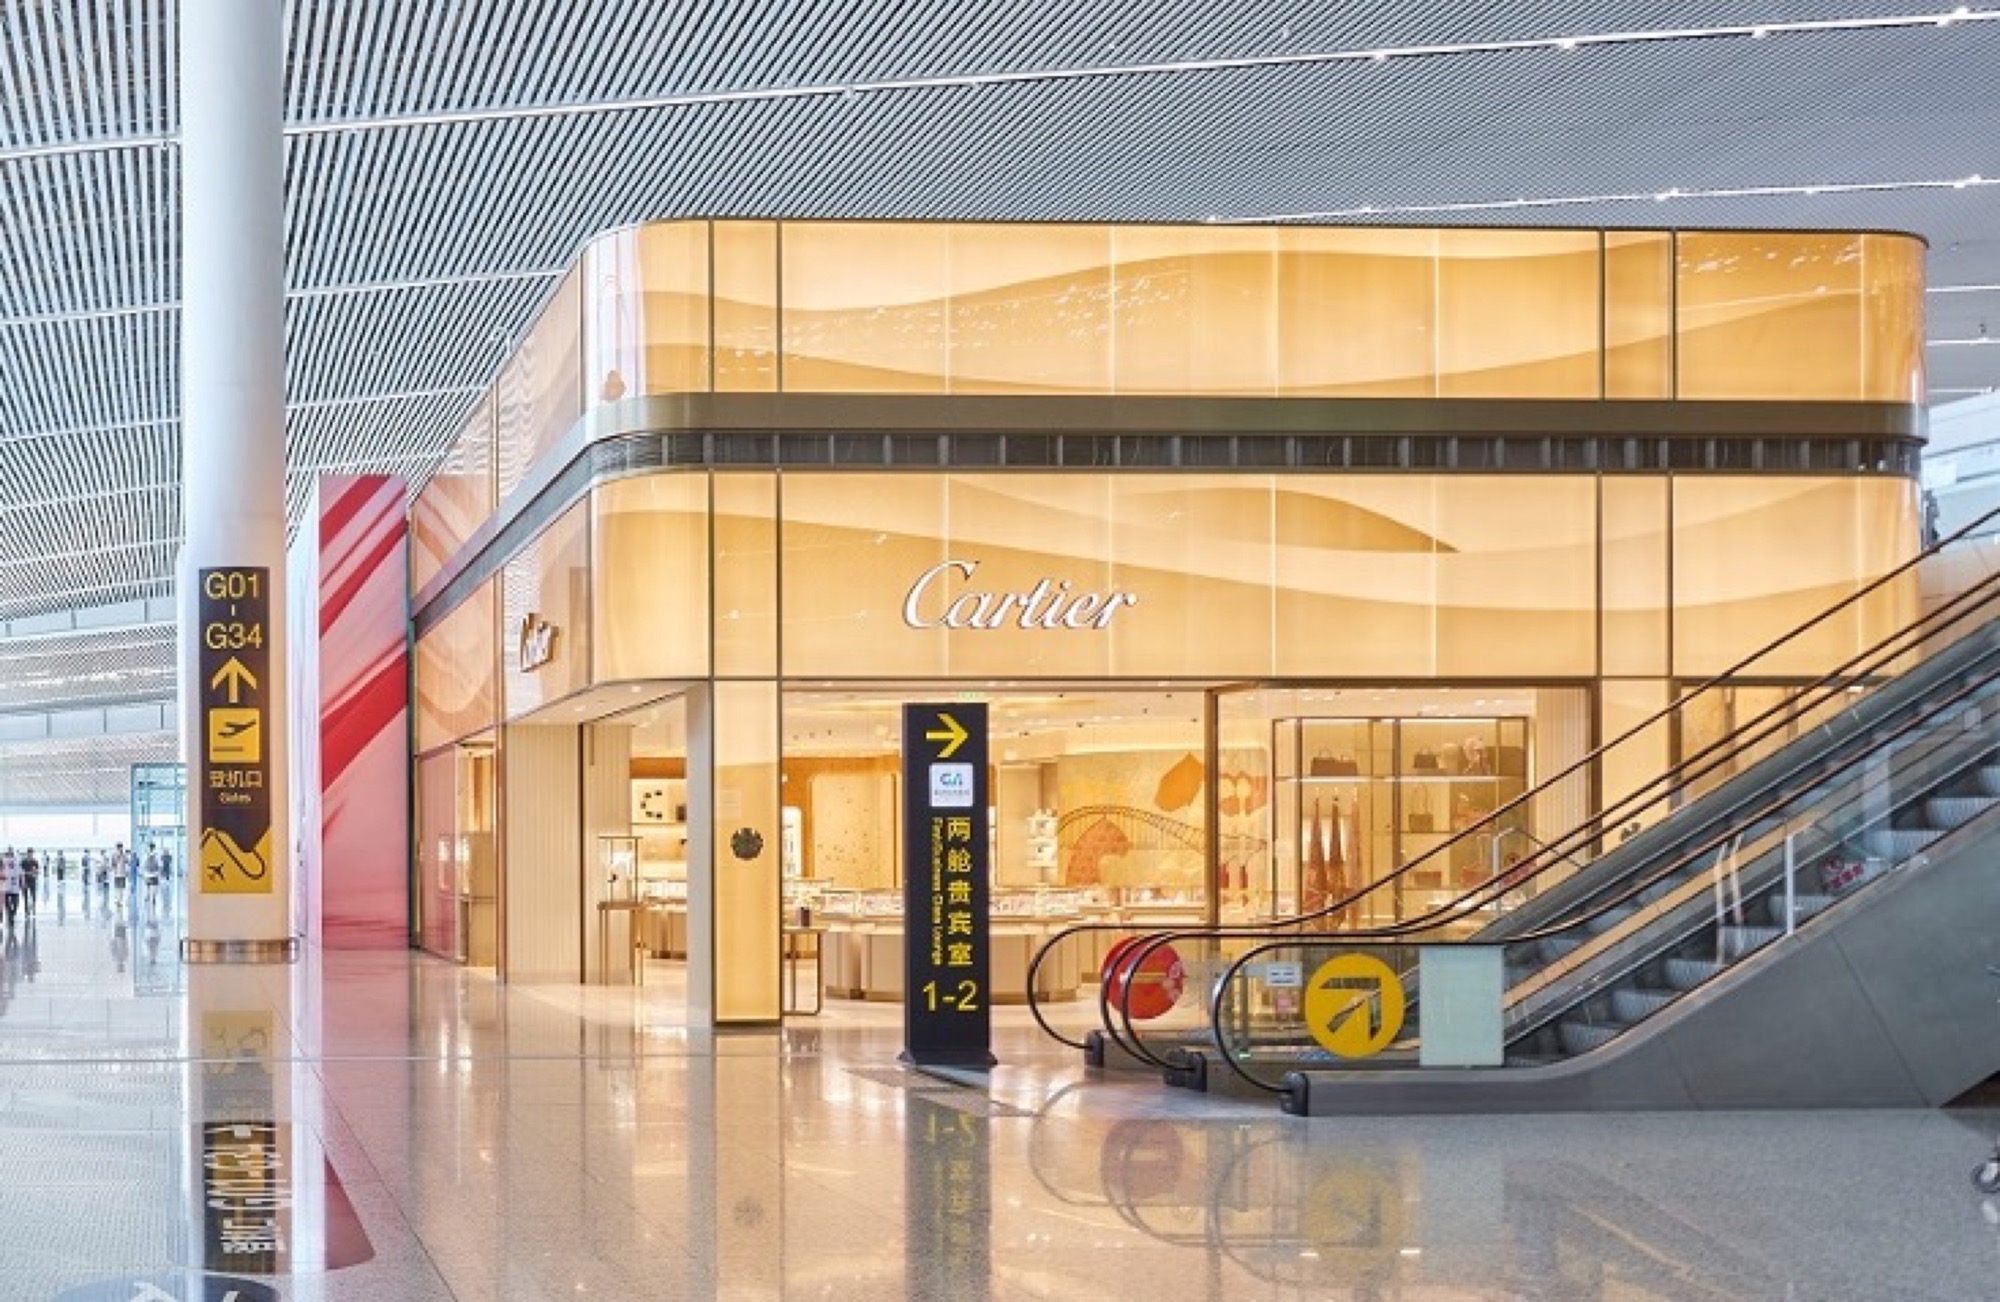 TRBusiness on LinkedIn: Chanel creates new shopping mecca at